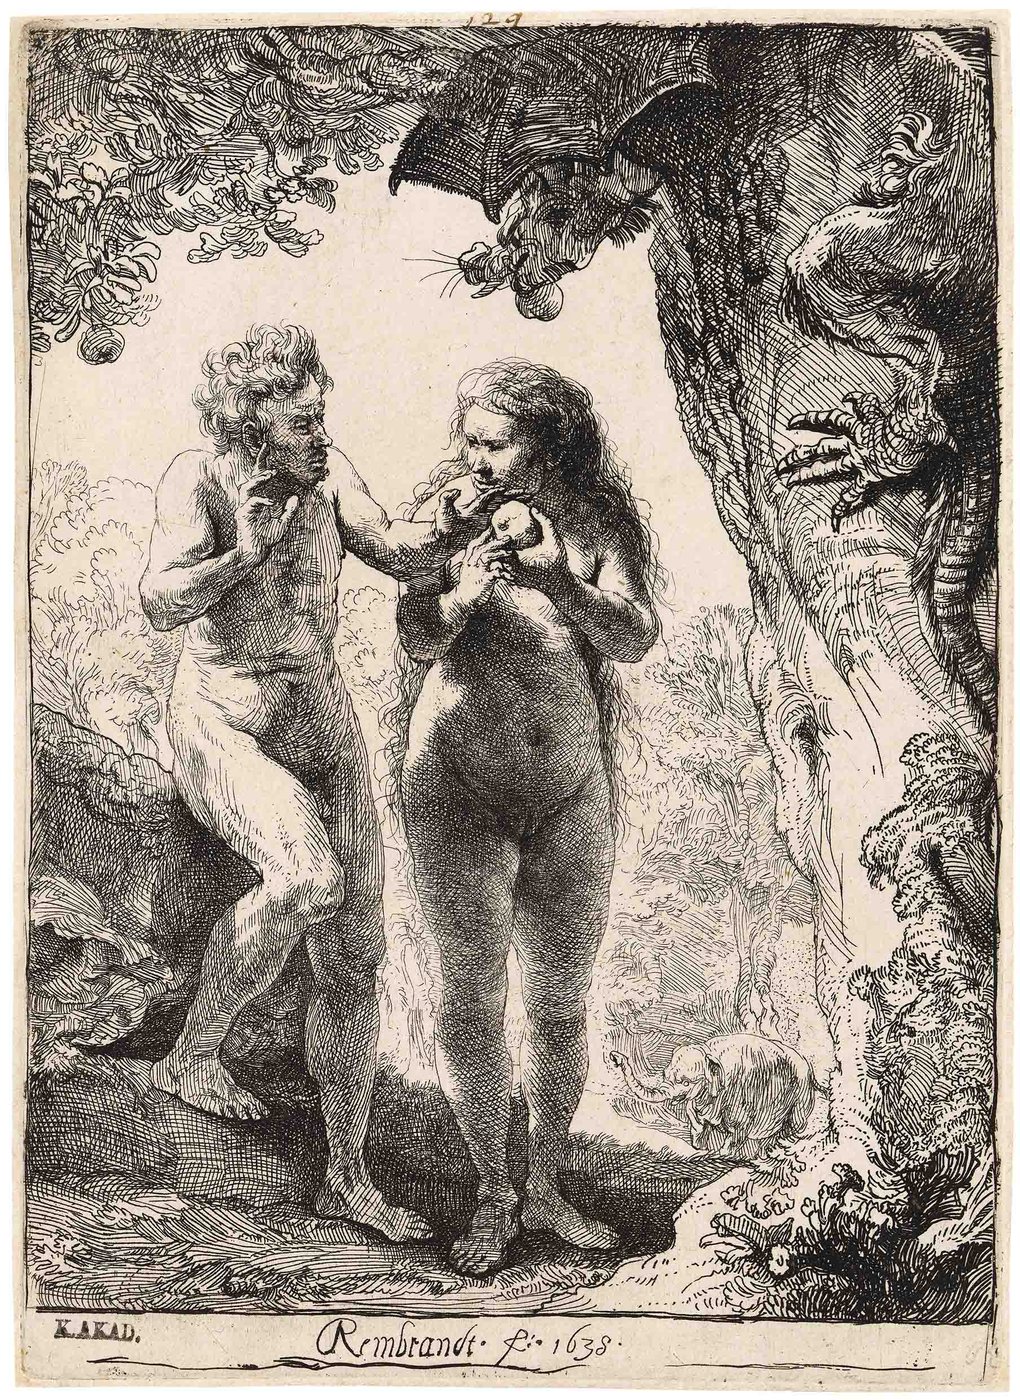 In the centre of the picture Eve, standing under an apple tree, is holding an apple in her hands, while Adam, on the left of the picture, seems to be warning against eating the apple with a raised finger. On the right edge of the picture, a large, dragon-like creature is winding its way up the trunk of the tree.